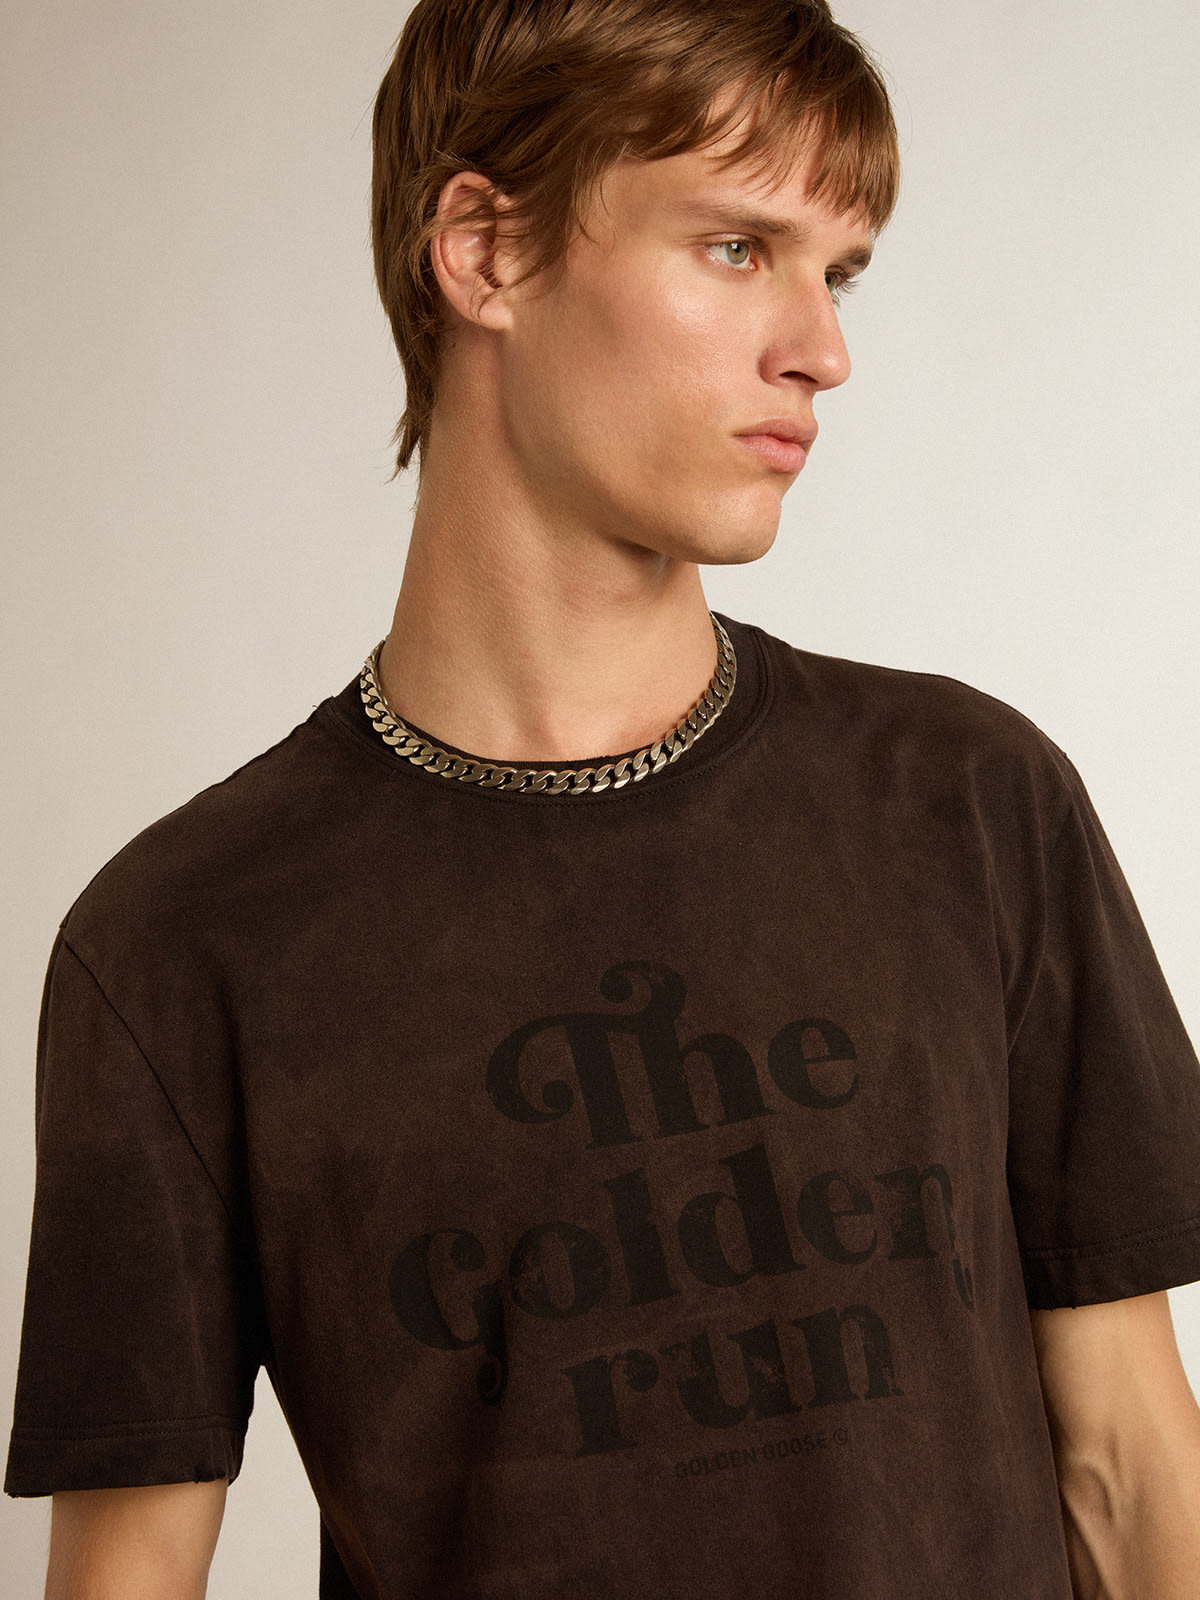 Golden Goose - Anthracite cotton T-shirt with lettering on the front in 